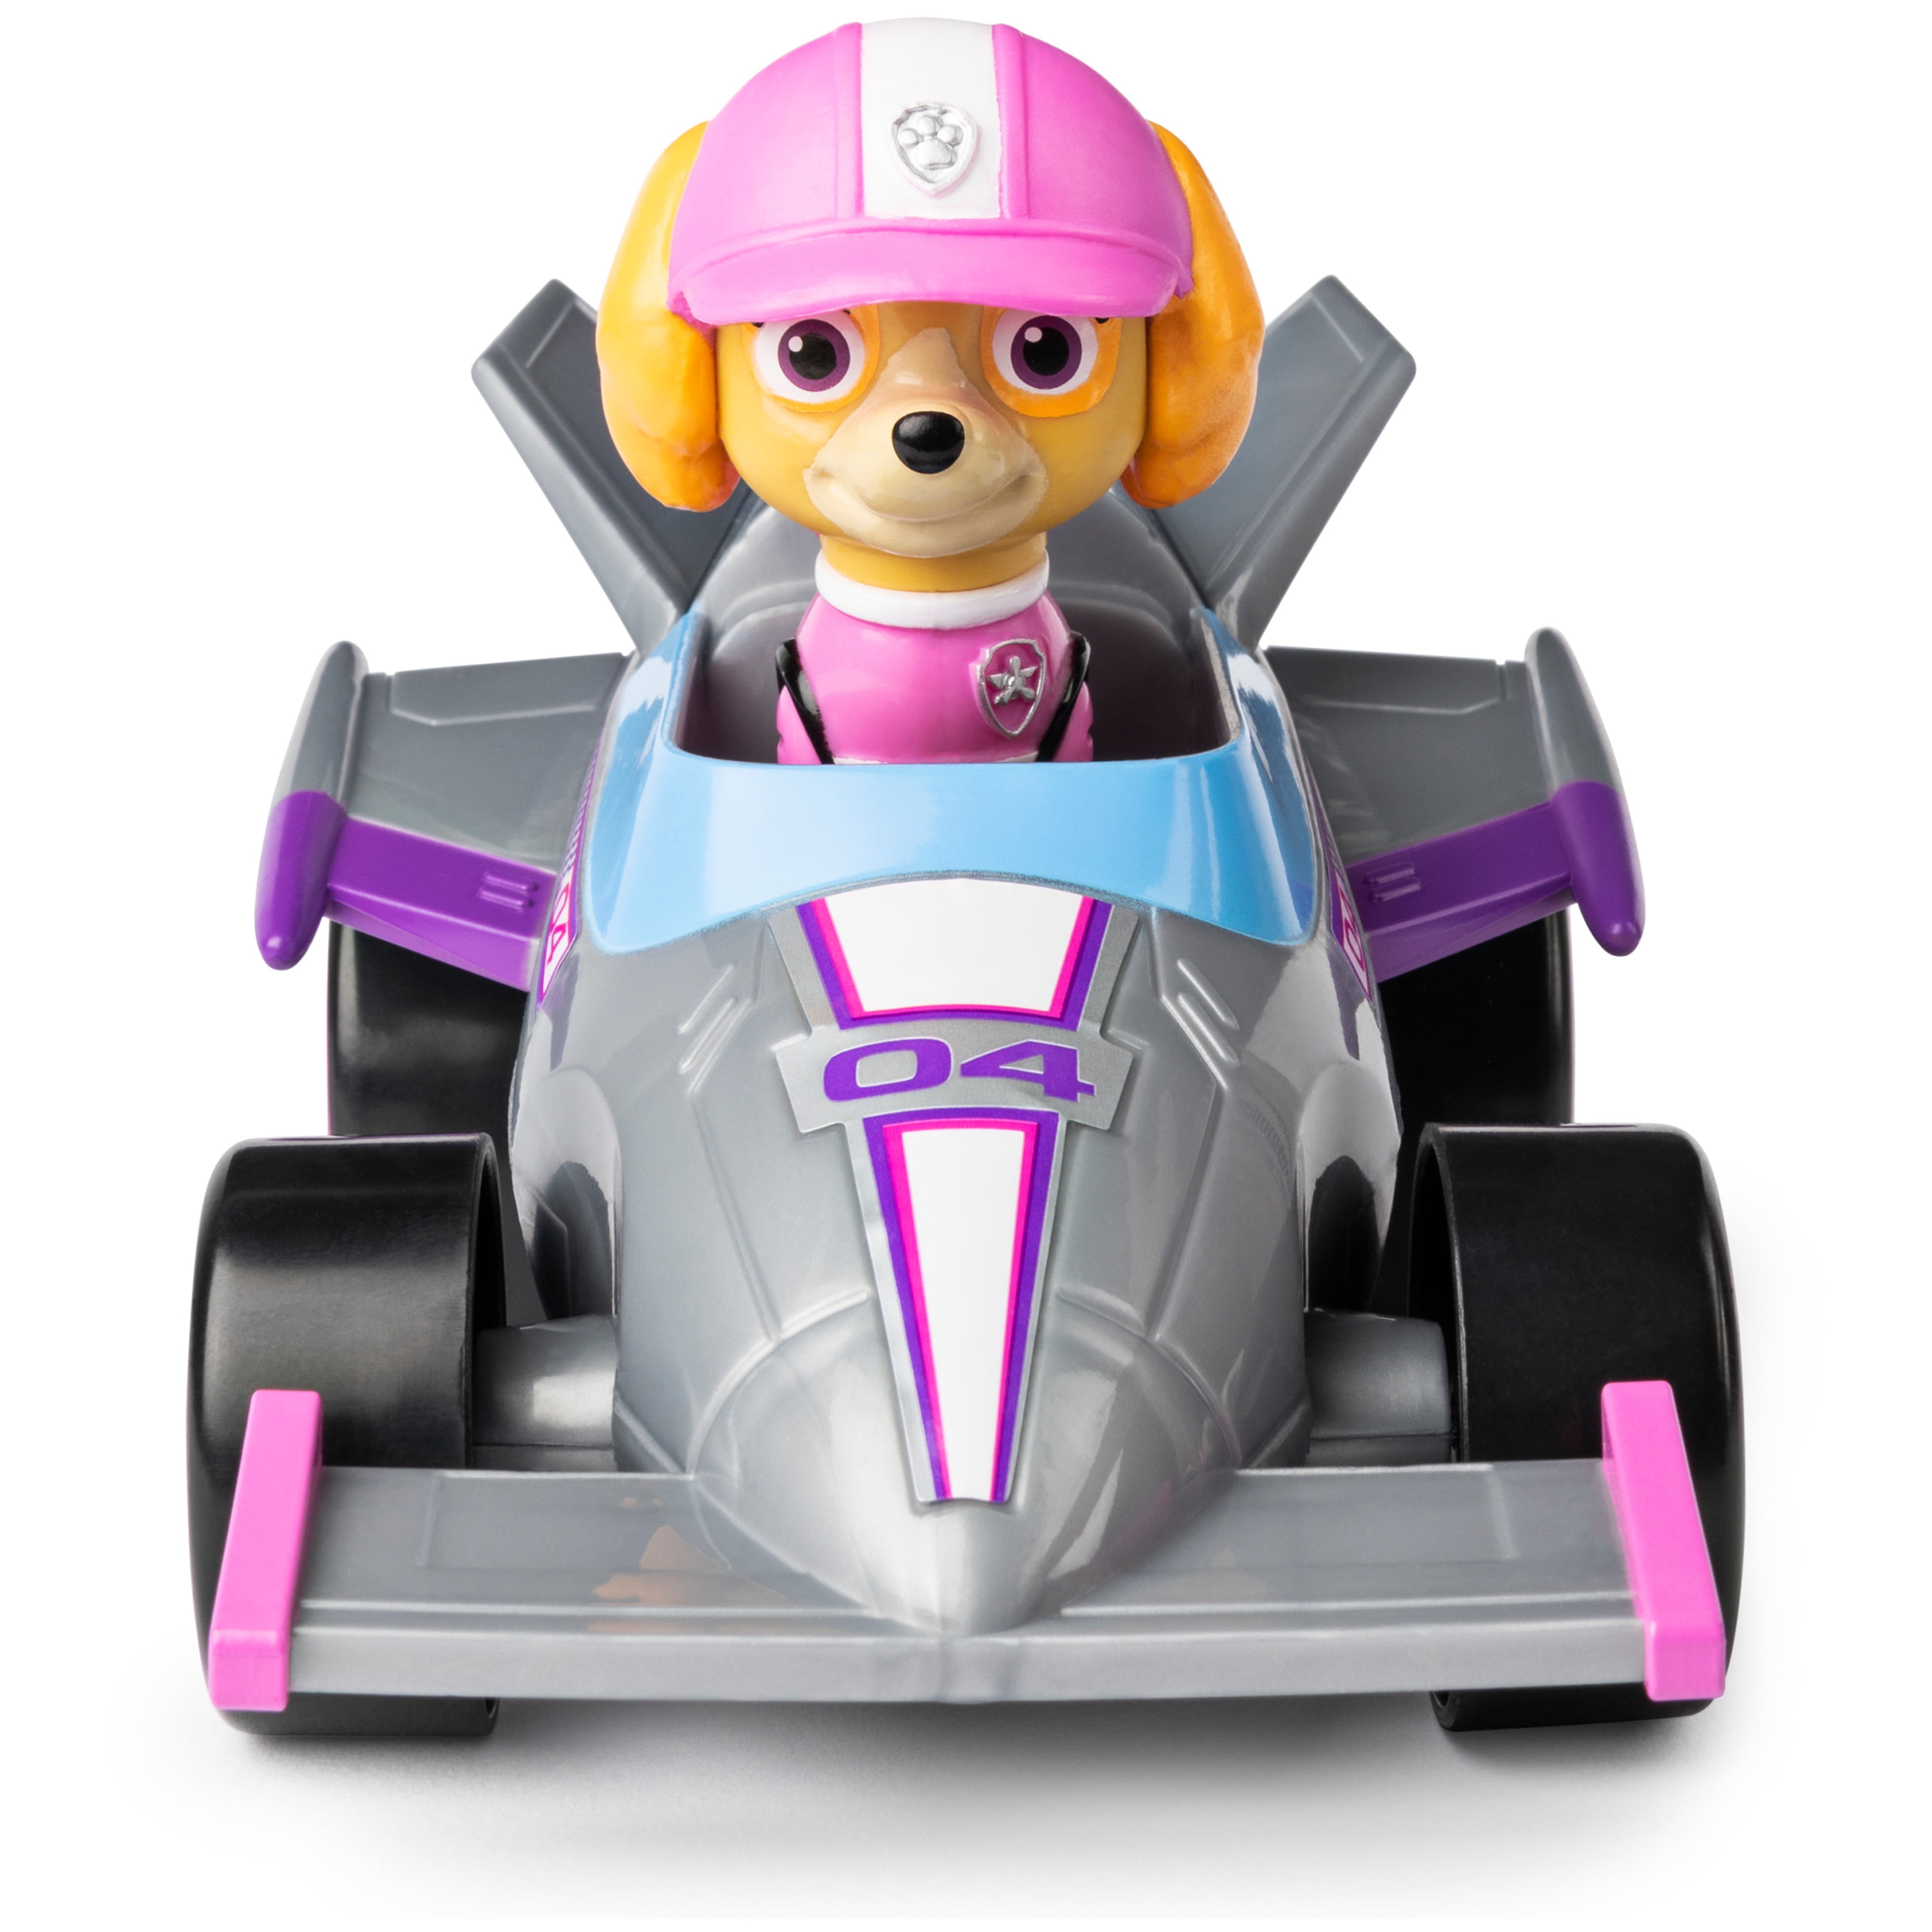 PAW Patrol, Ready Race Rescue Skye's Race & Go Deluxe Vehicle, for